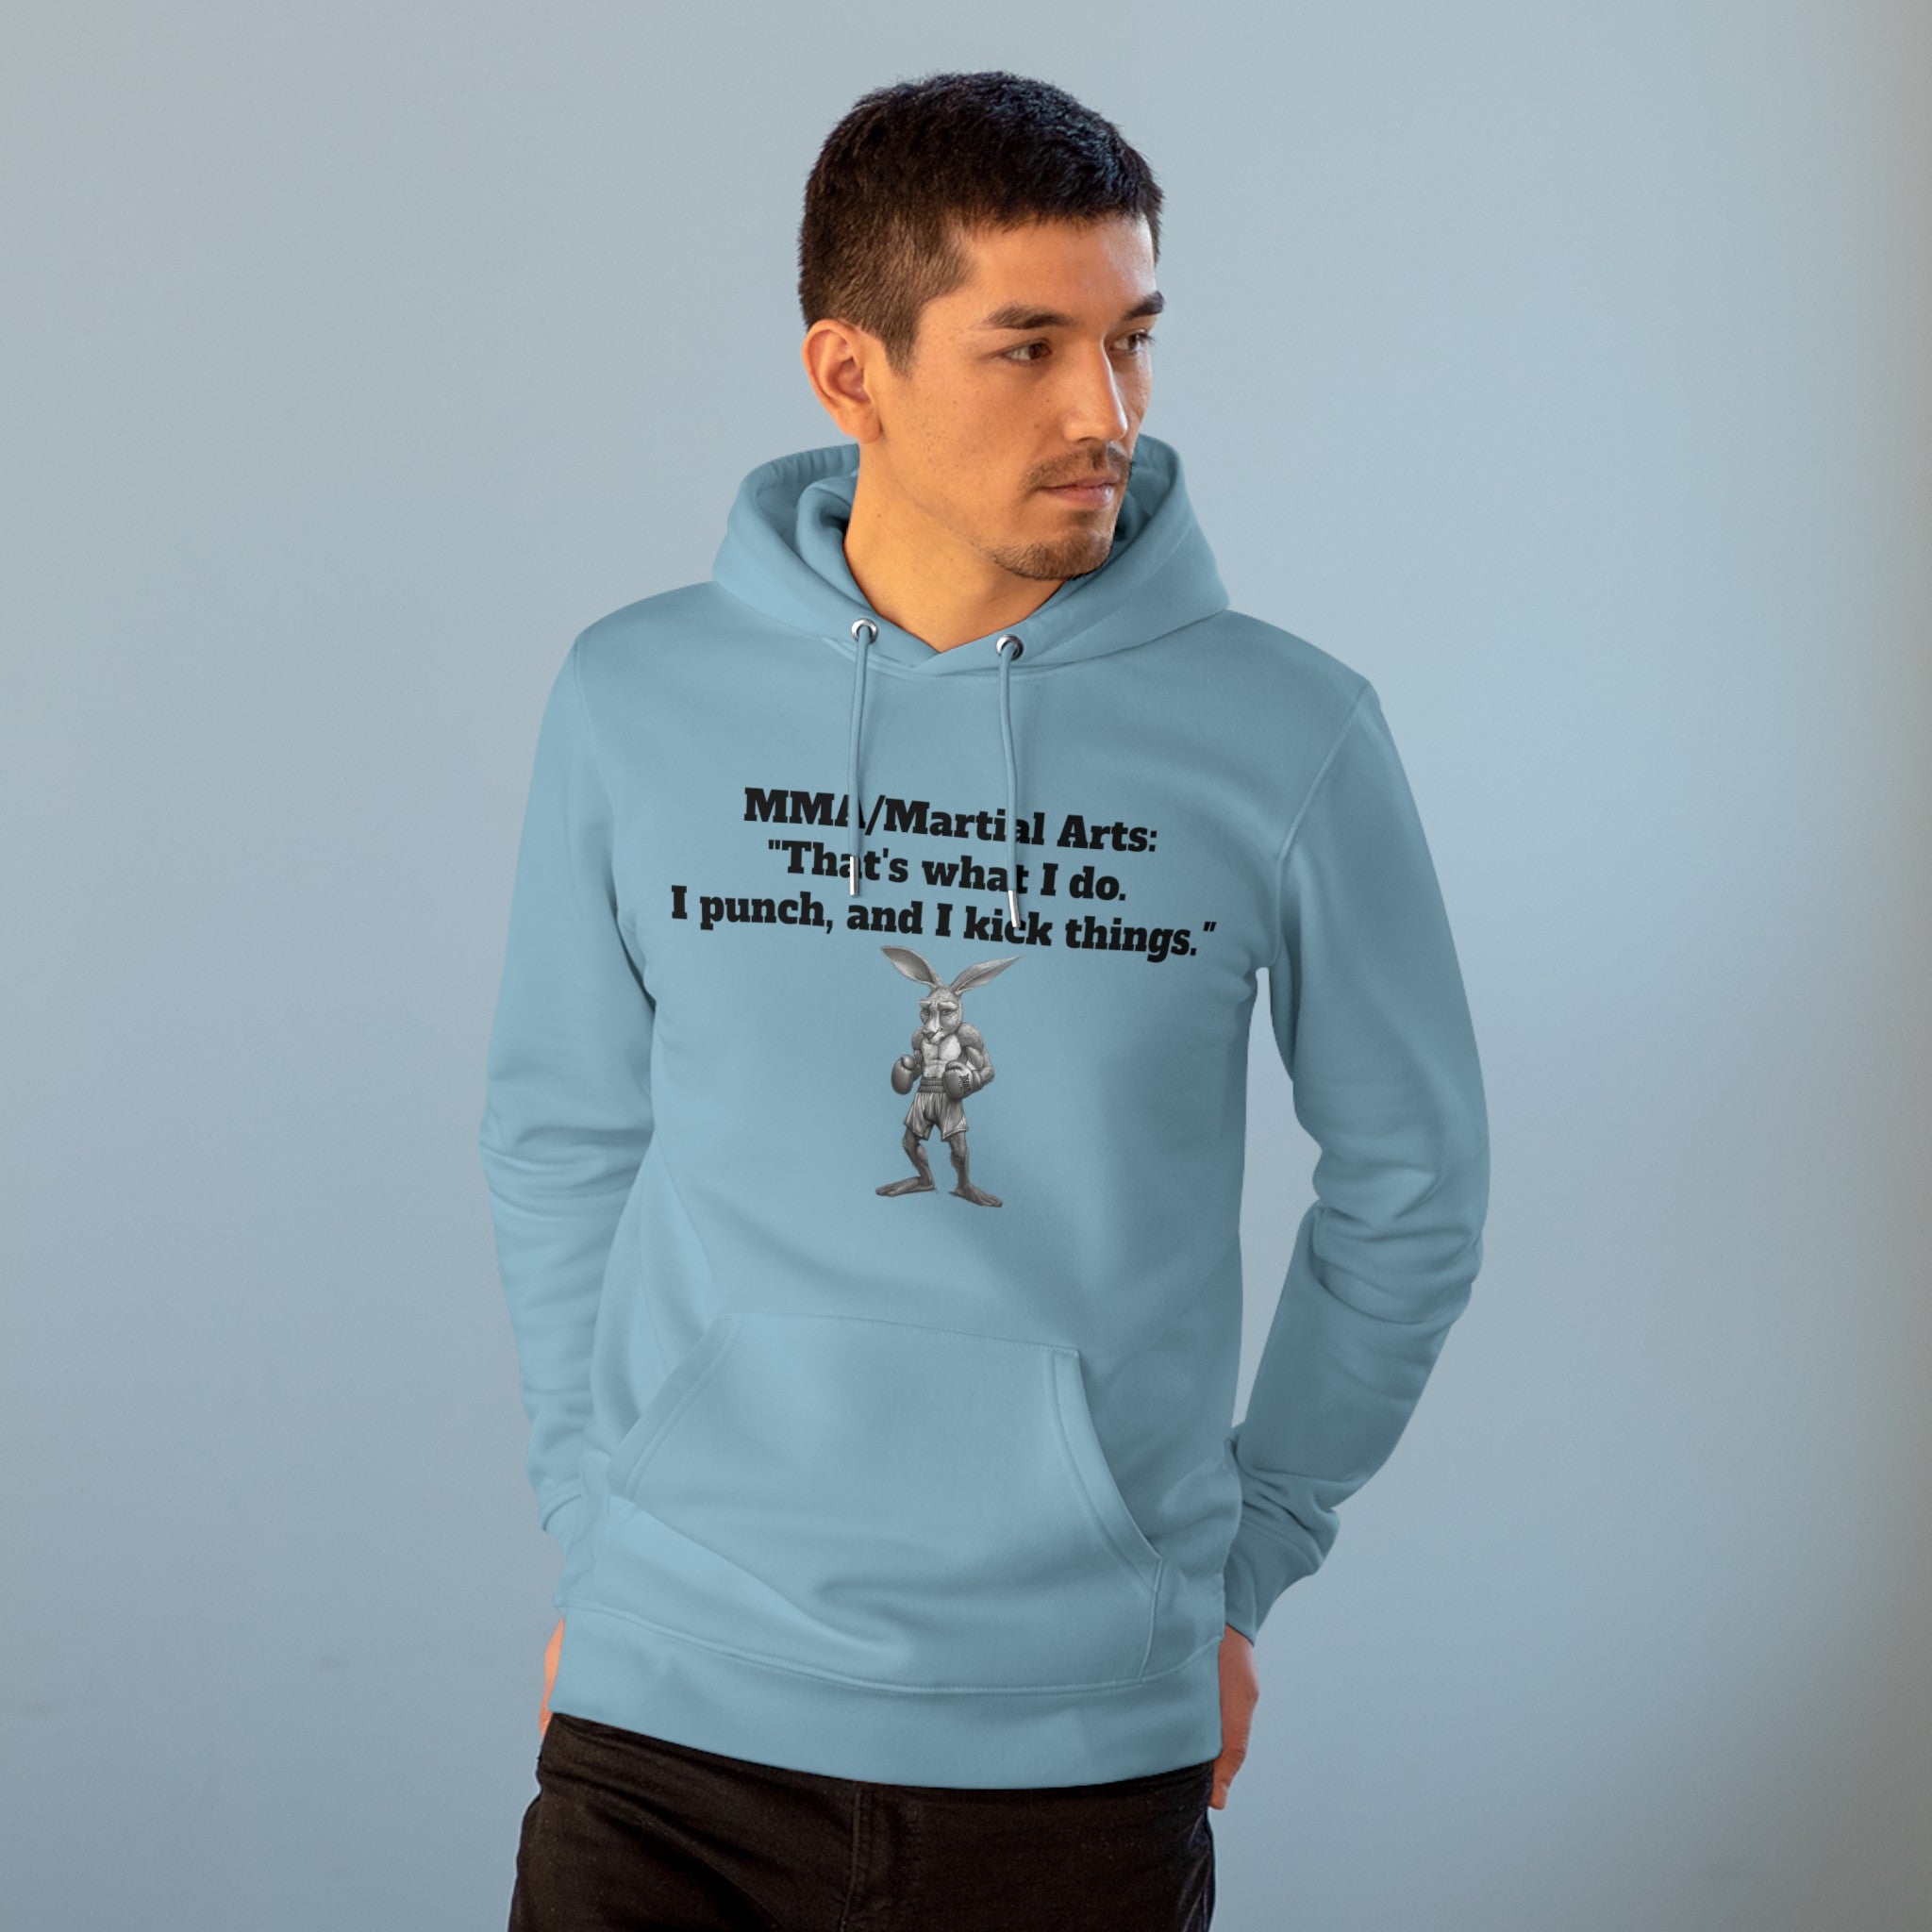 The image showcases a stylish unisex cruiser hoodie, featuring a dynamic illustration of a kangaroo in a boxing pose. The bold statement "That's What I Do. I Punch, and I Kick Things." is prominently displayed, highlighting the hoodie’s unique blend of humor and martial arts culture. The hoodie’s soft, comfortable fabric and relaxed fit are also evident.